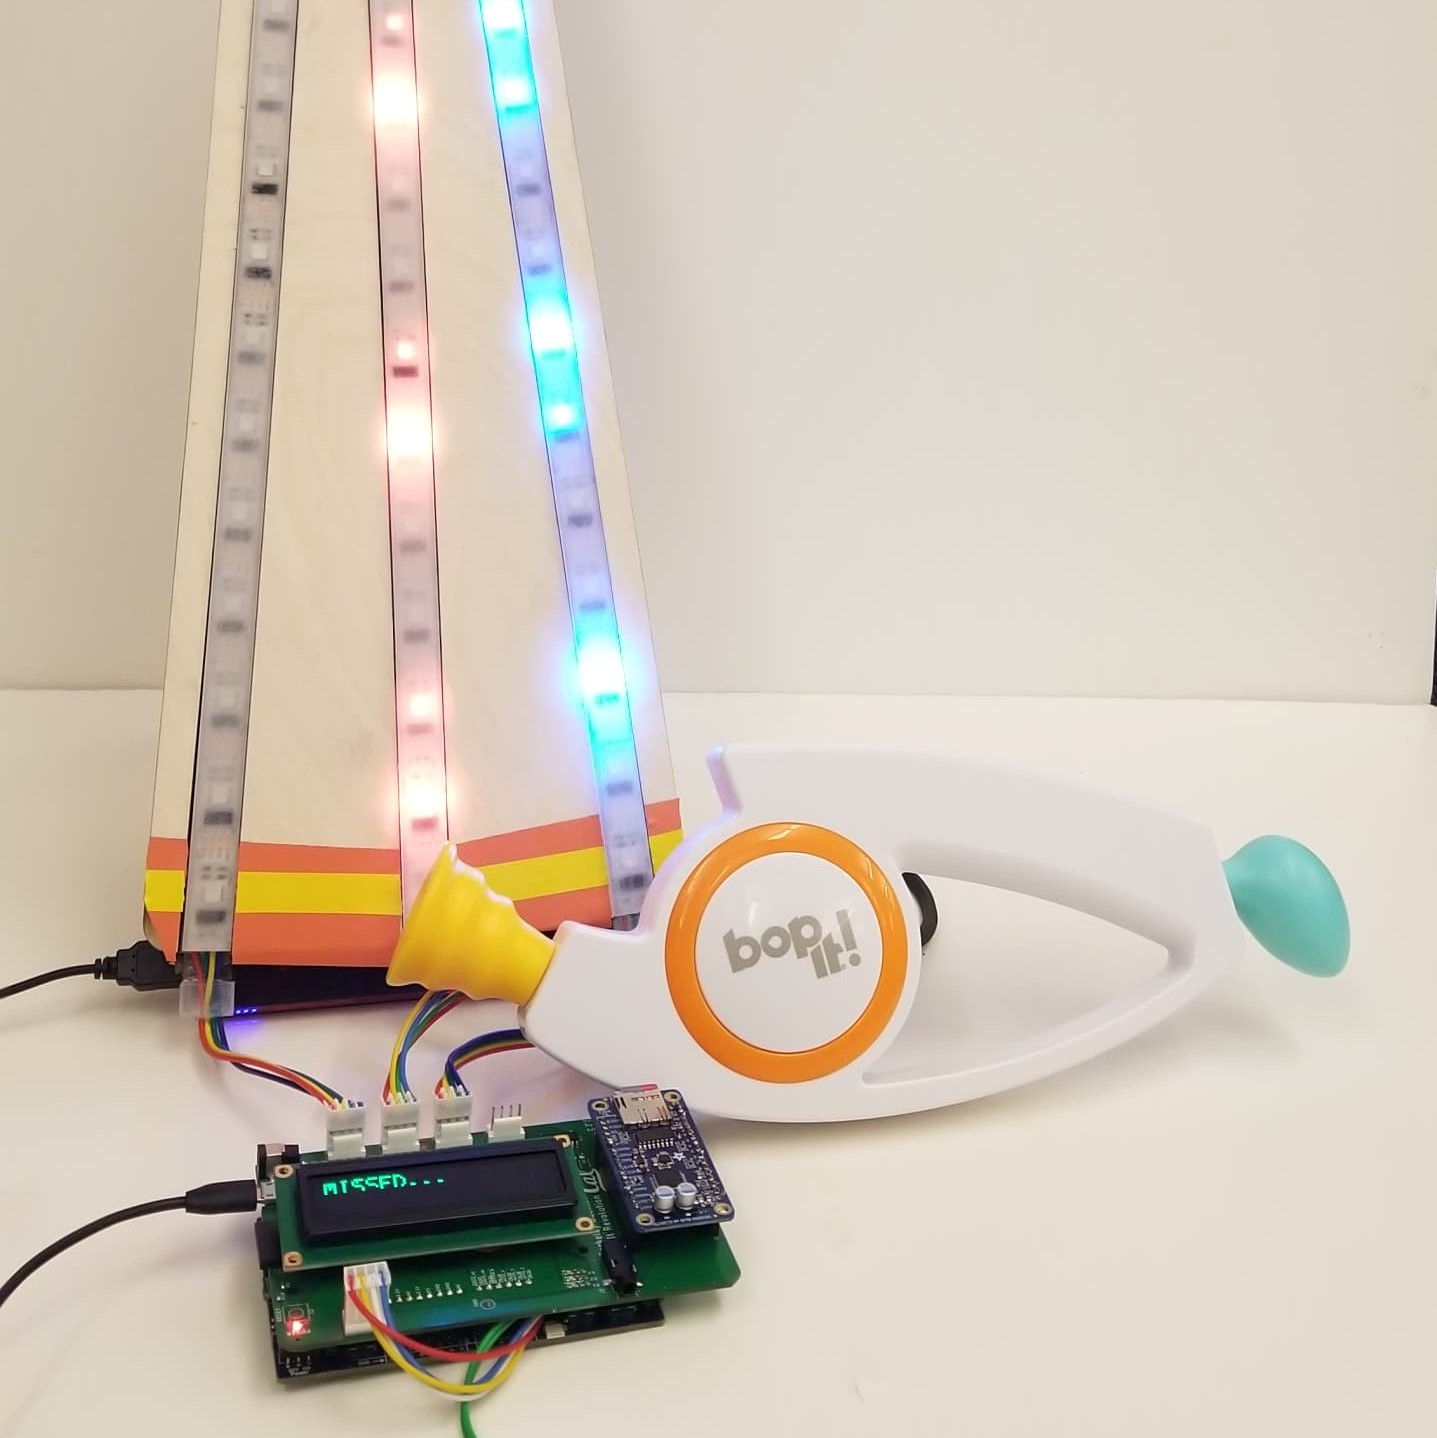 Bop It! Rhythm Game Implemented in Hardware